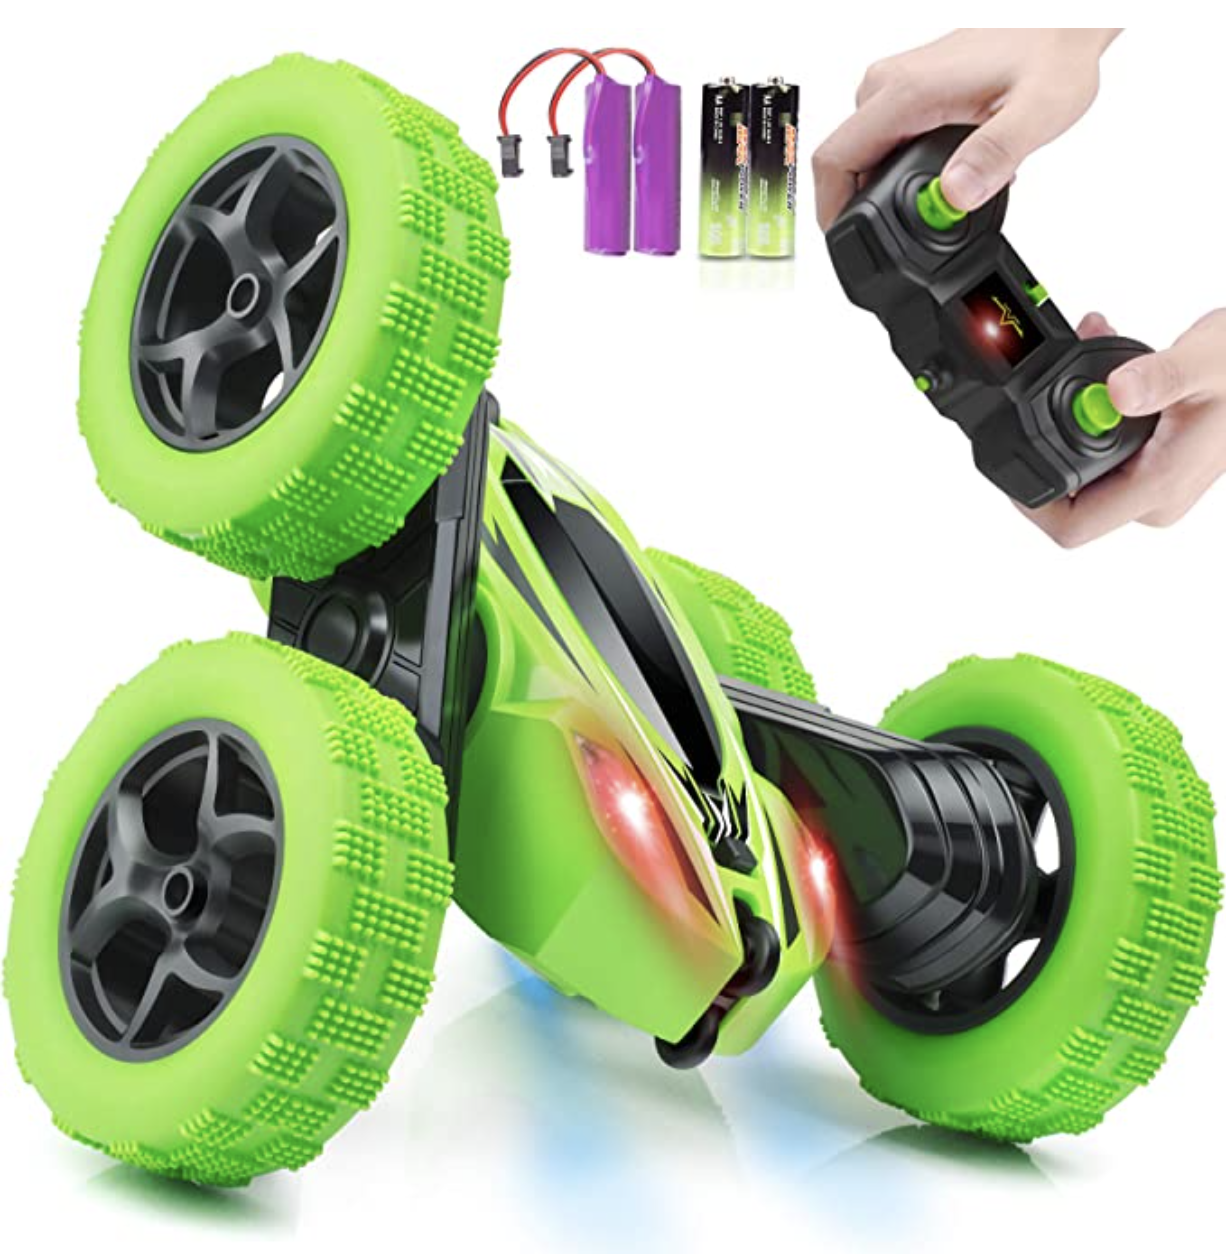 6 Channel Remote controlled Stunt Car With Oversized Wheels 360 Degree Stunts